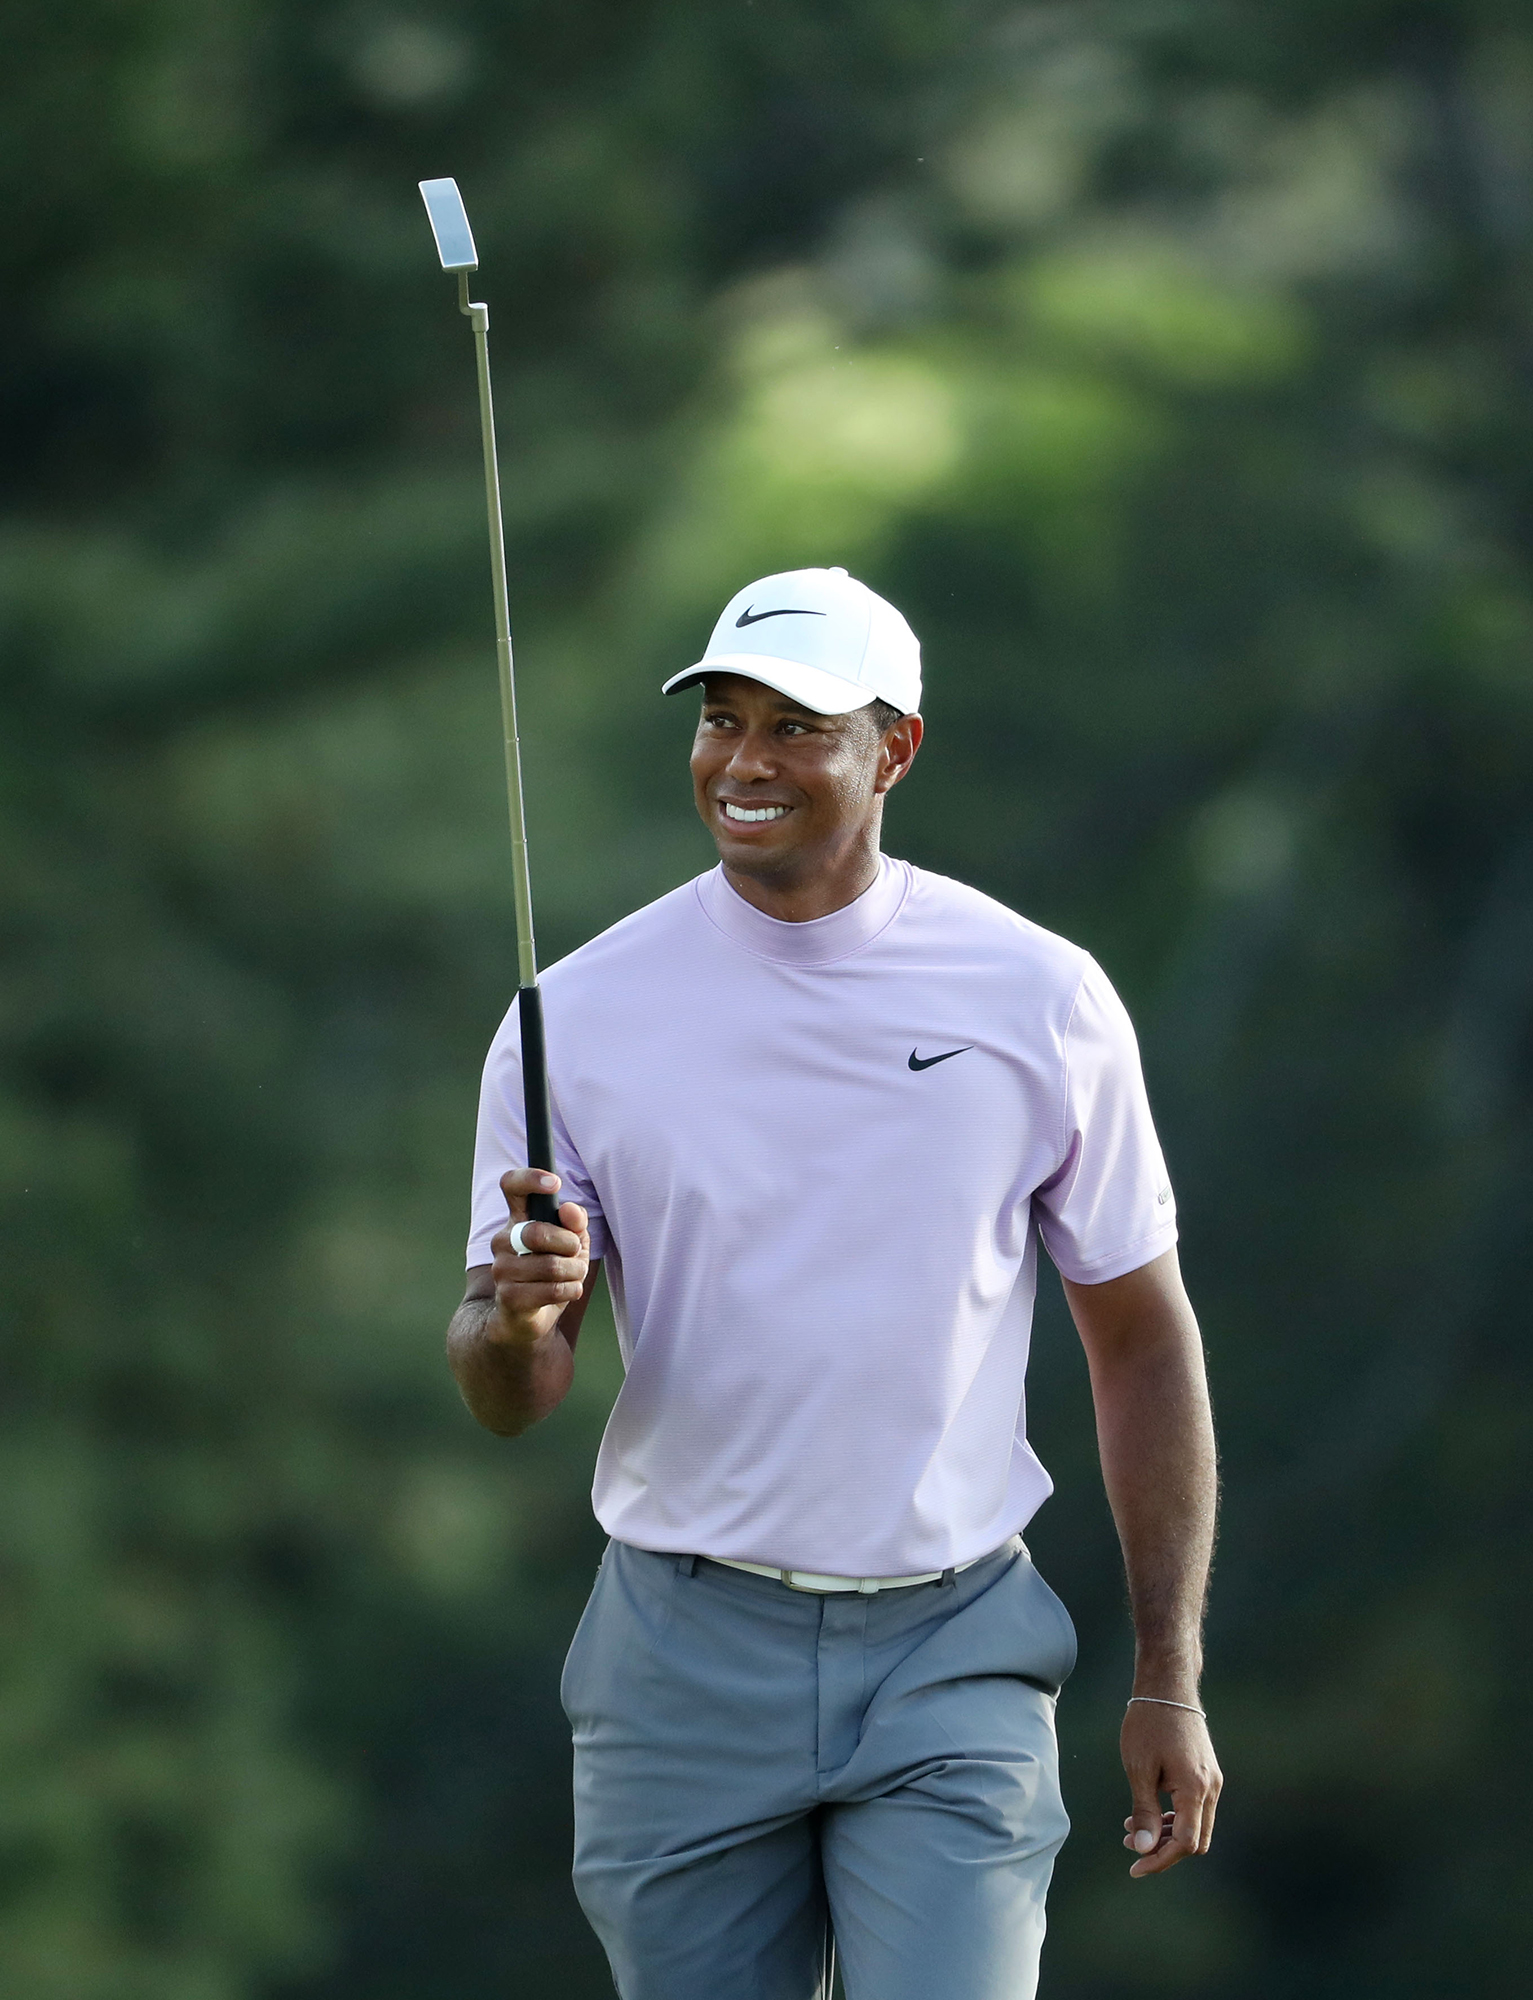 Tiger Woods walks and holds a golf club vertically up with his right hand. He wears a white cap with a Nike logo, a light pink shirt with a Nike logo, and light pastel blue-green pants.